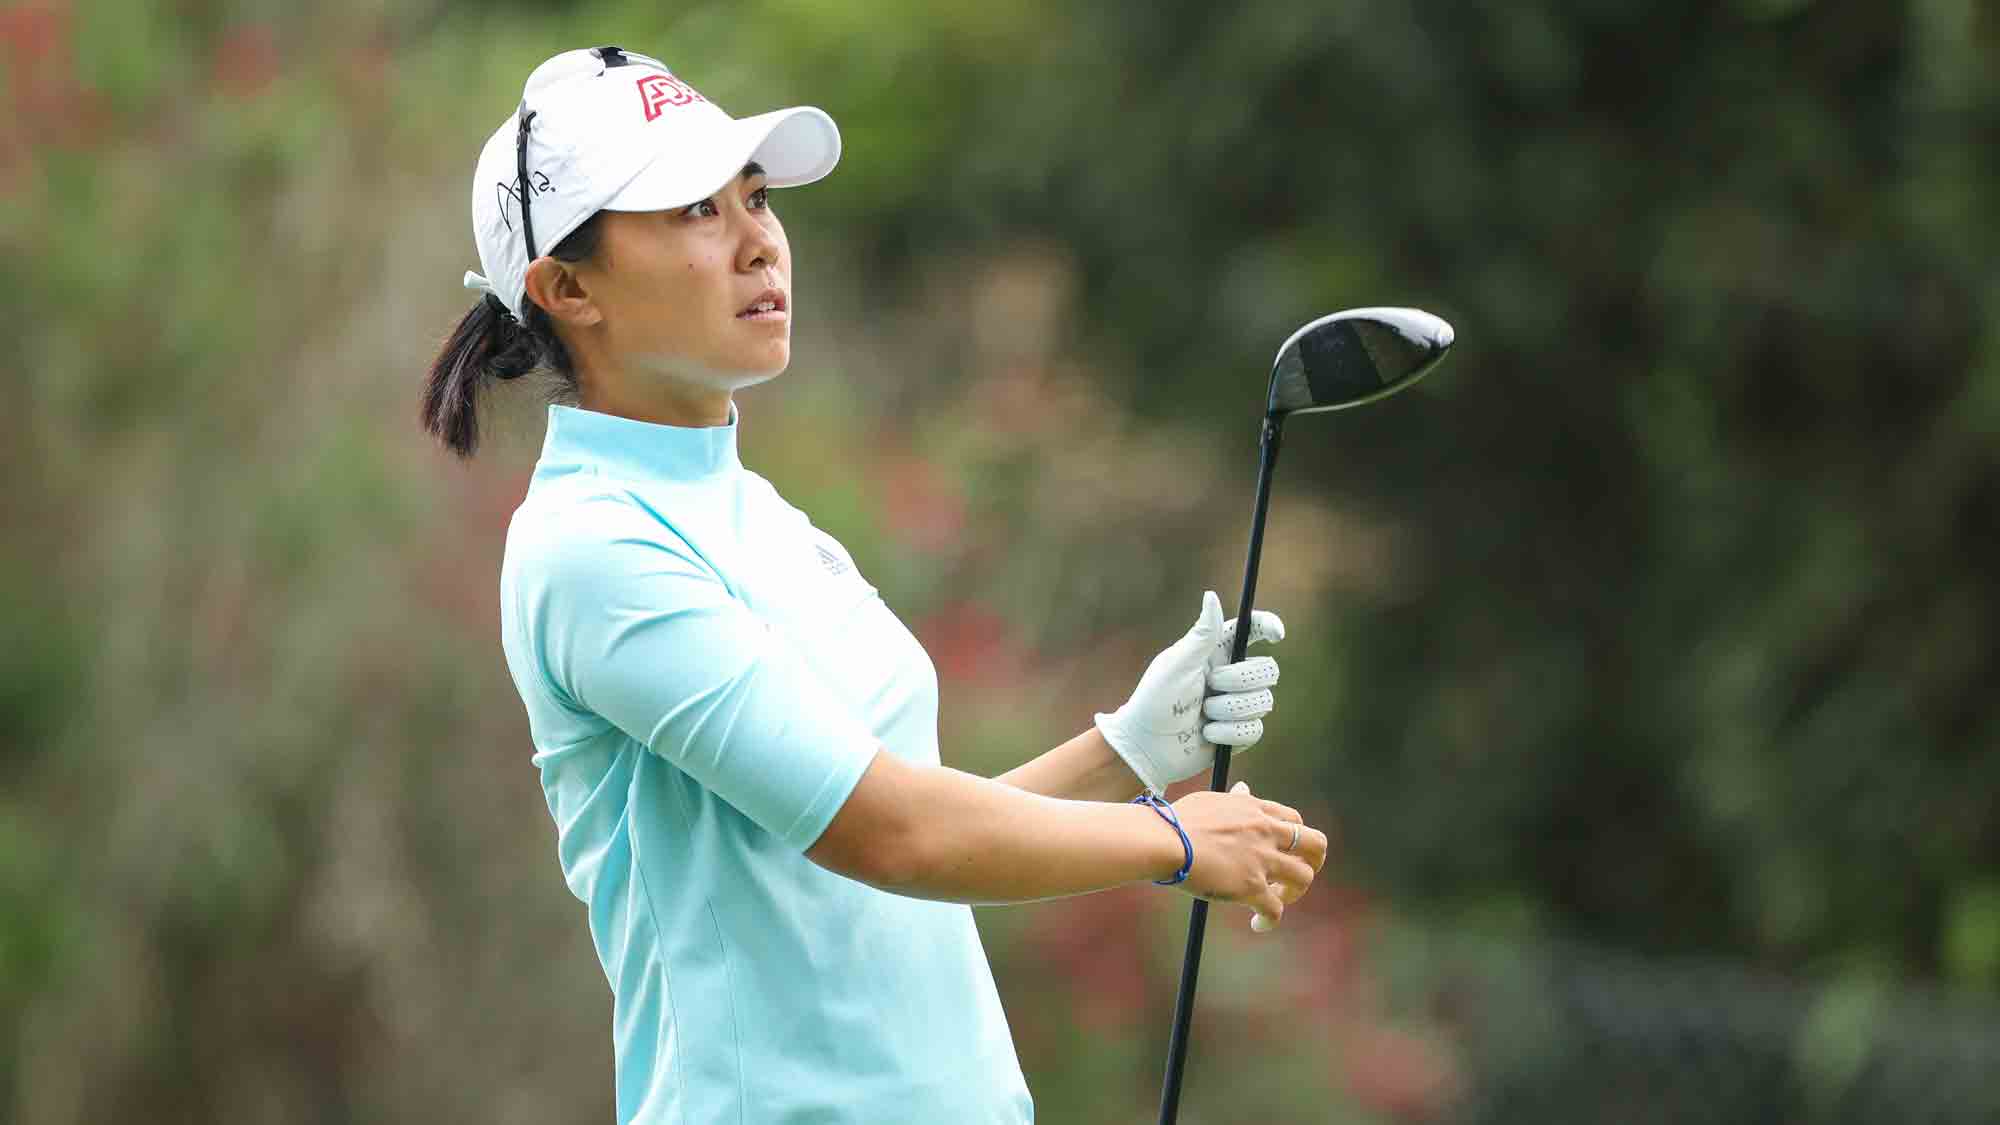 Danielle Kang during the opening round of the LPGA MEDIHEAL Championship